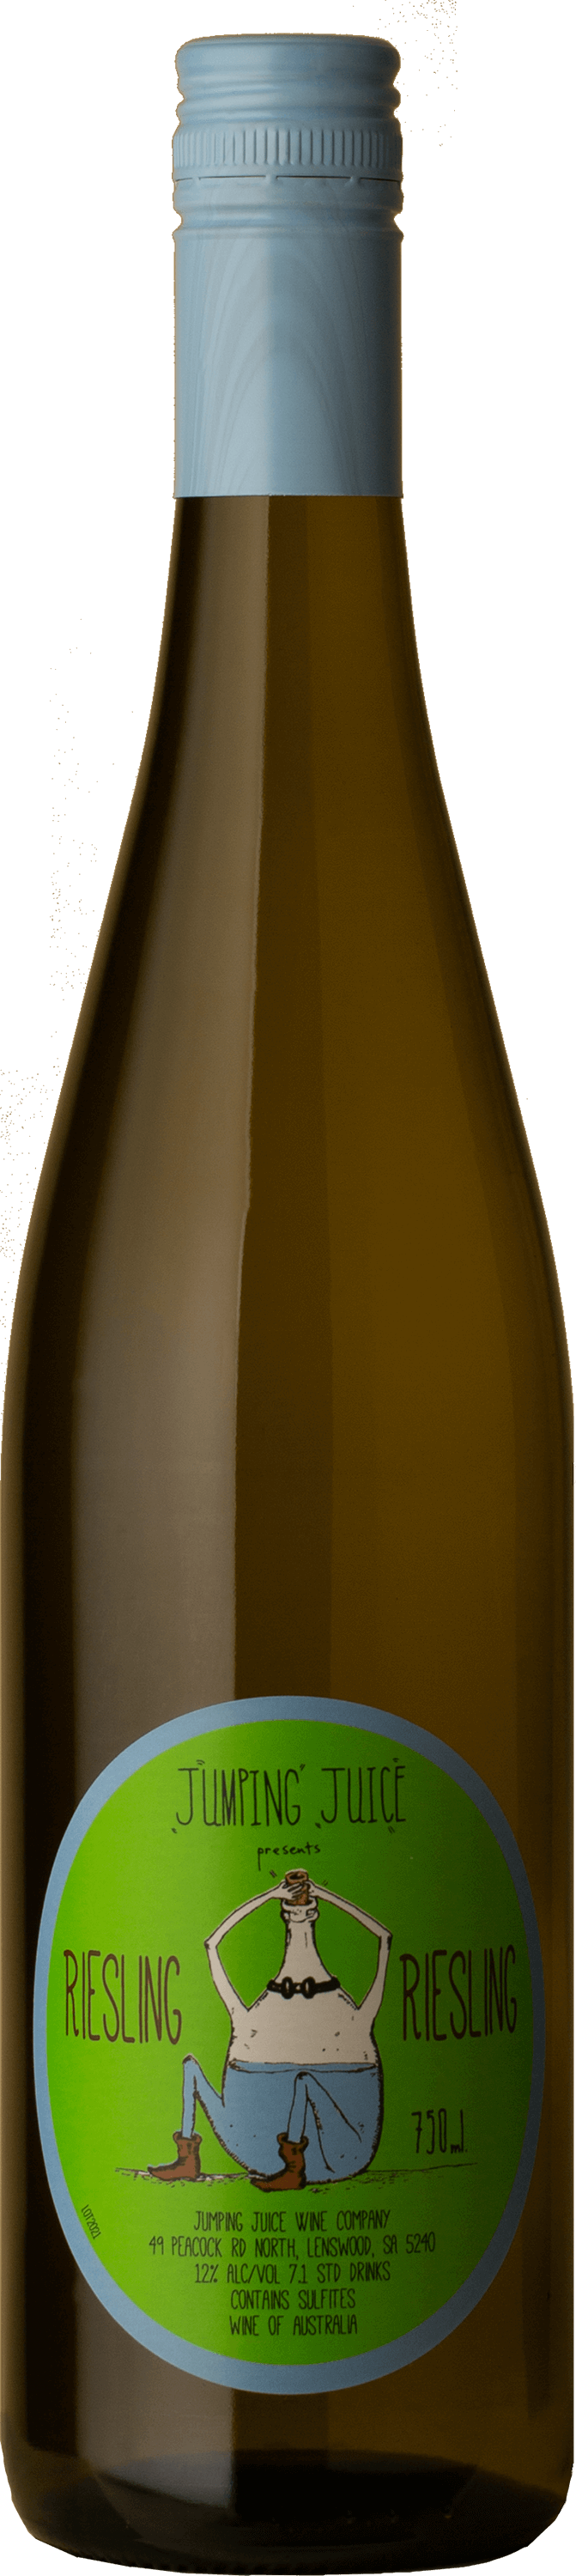 Jumping Juice - Riesling 2021 White Wine